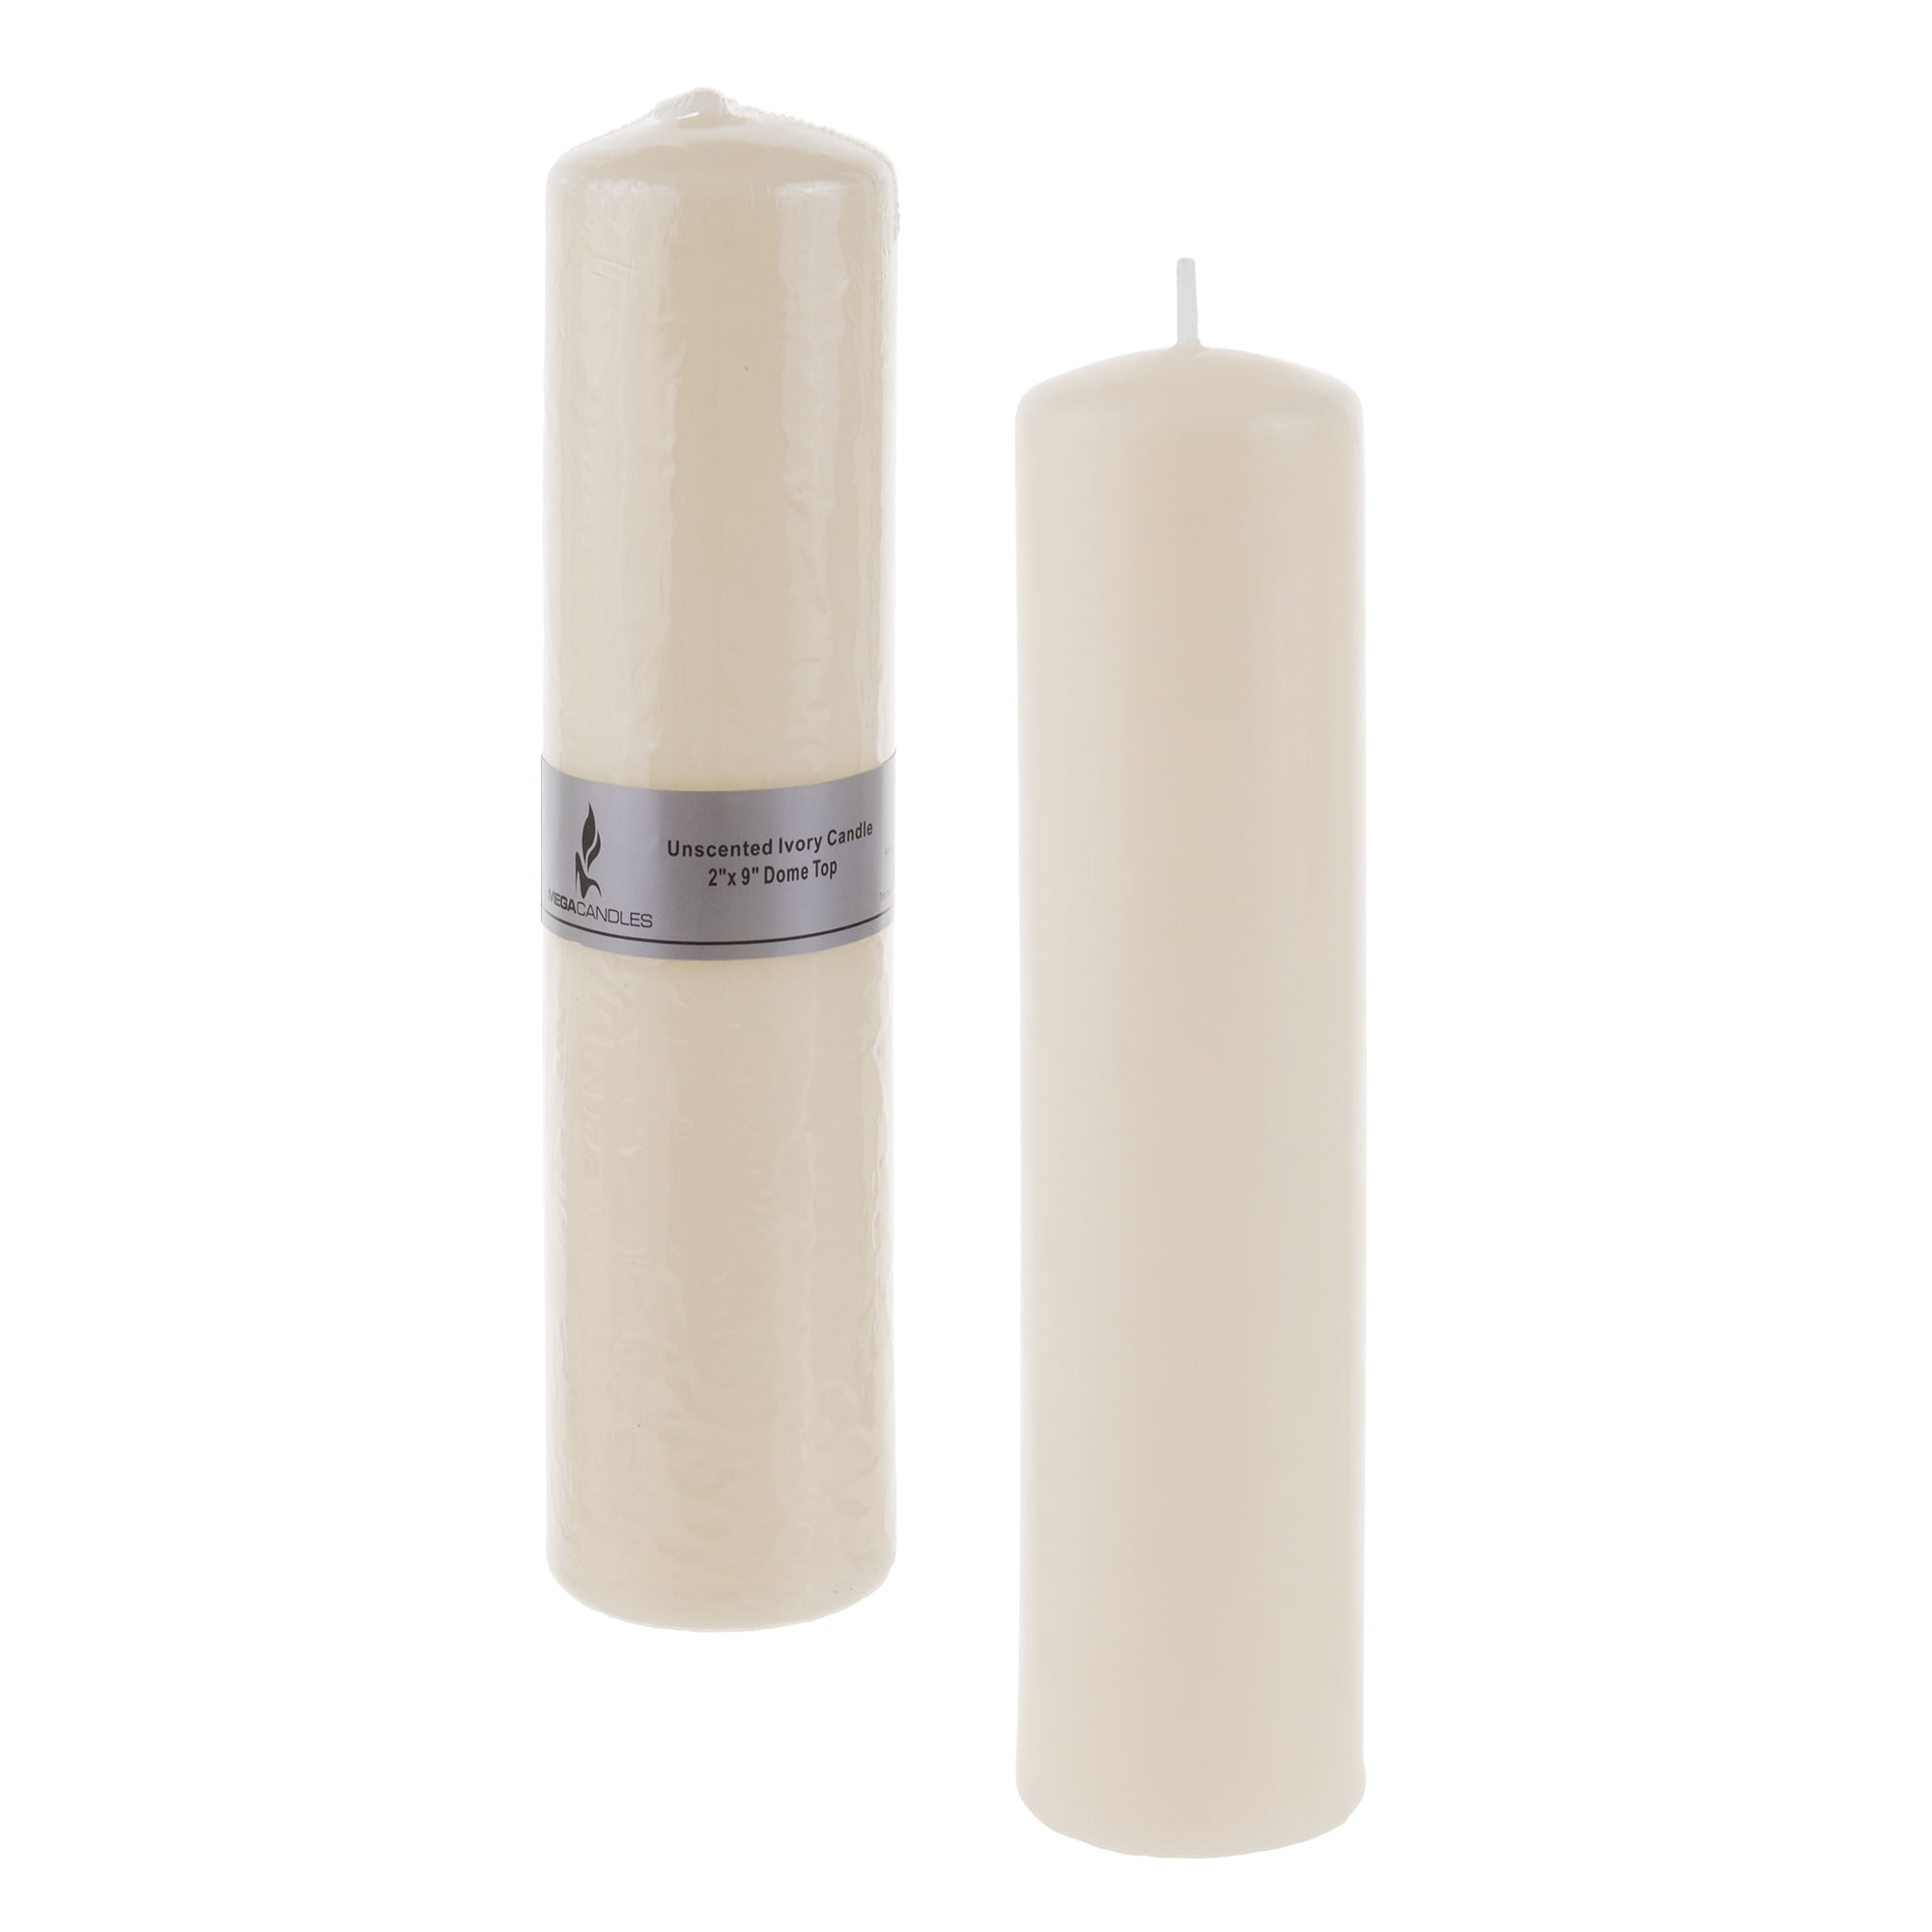 Ivory 6PCS Mega Candles Unscented 3"x 9" Round Dome Top Pillar Candle